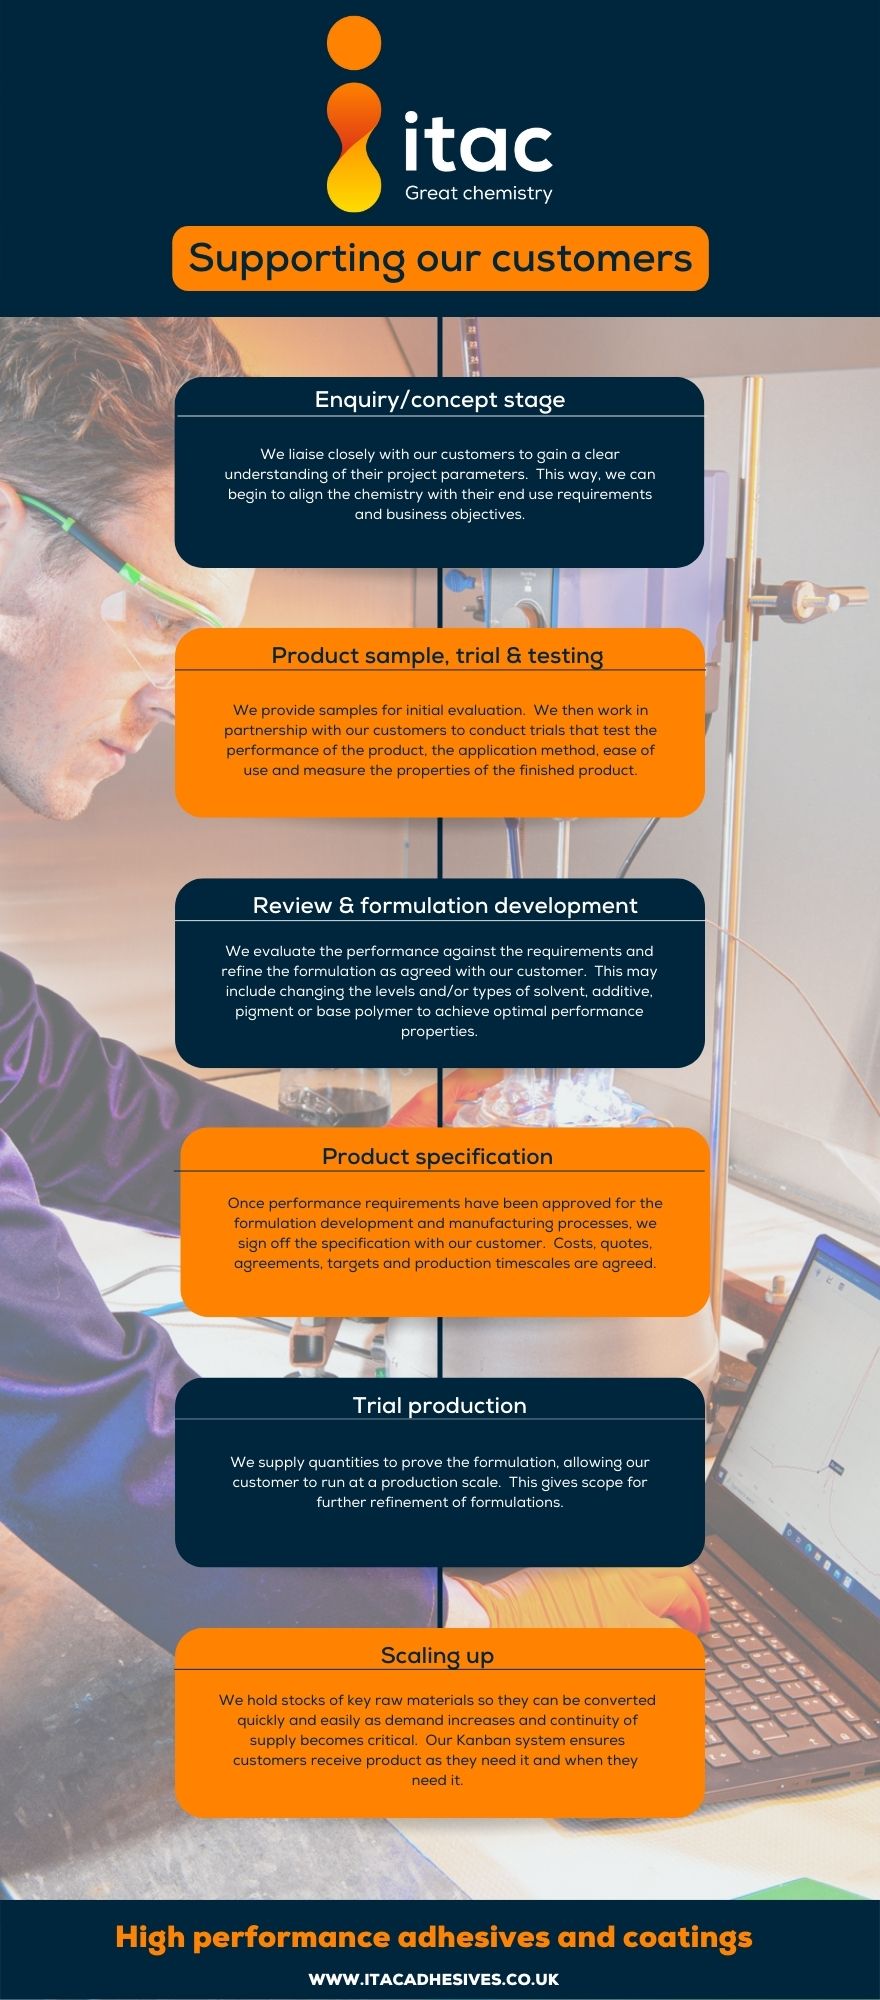 Infographic detailing how ITAC supports their coating application and formulation partners